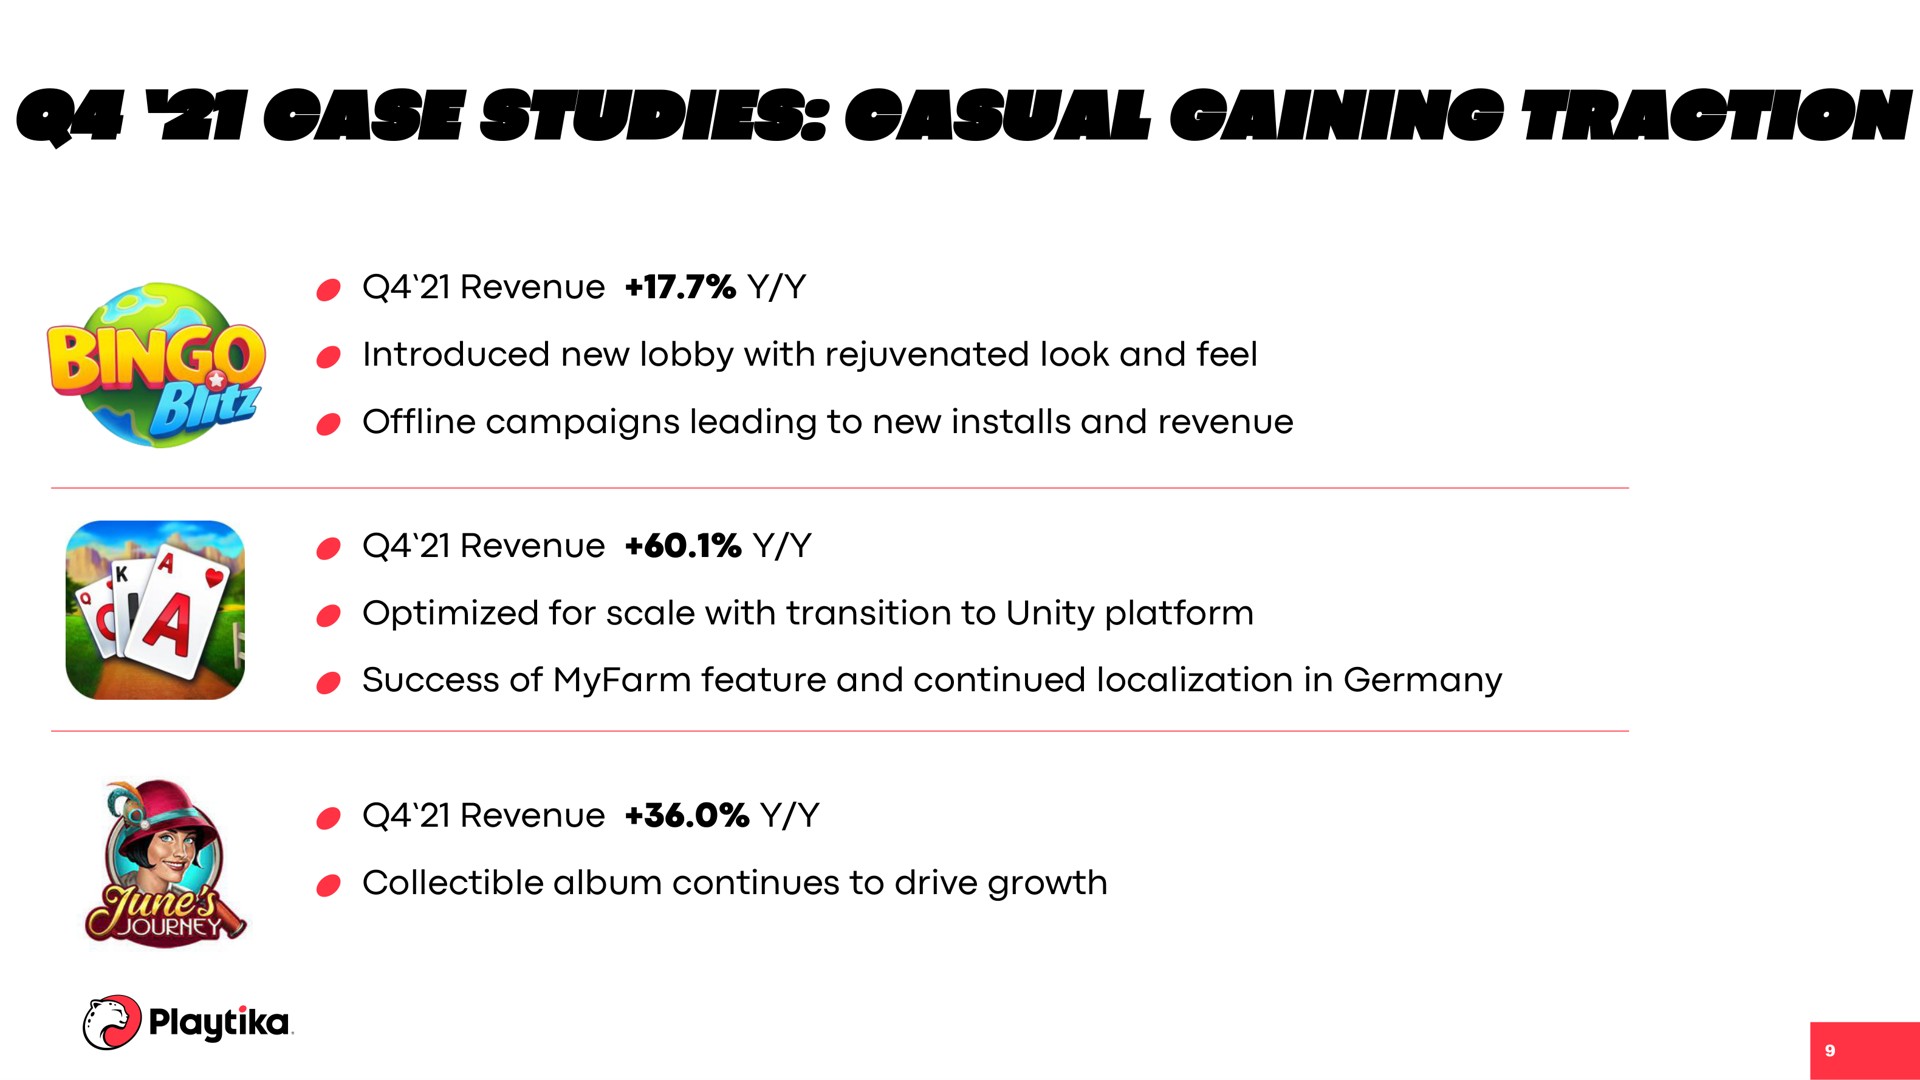 case studies casual gaining traction | Playtika